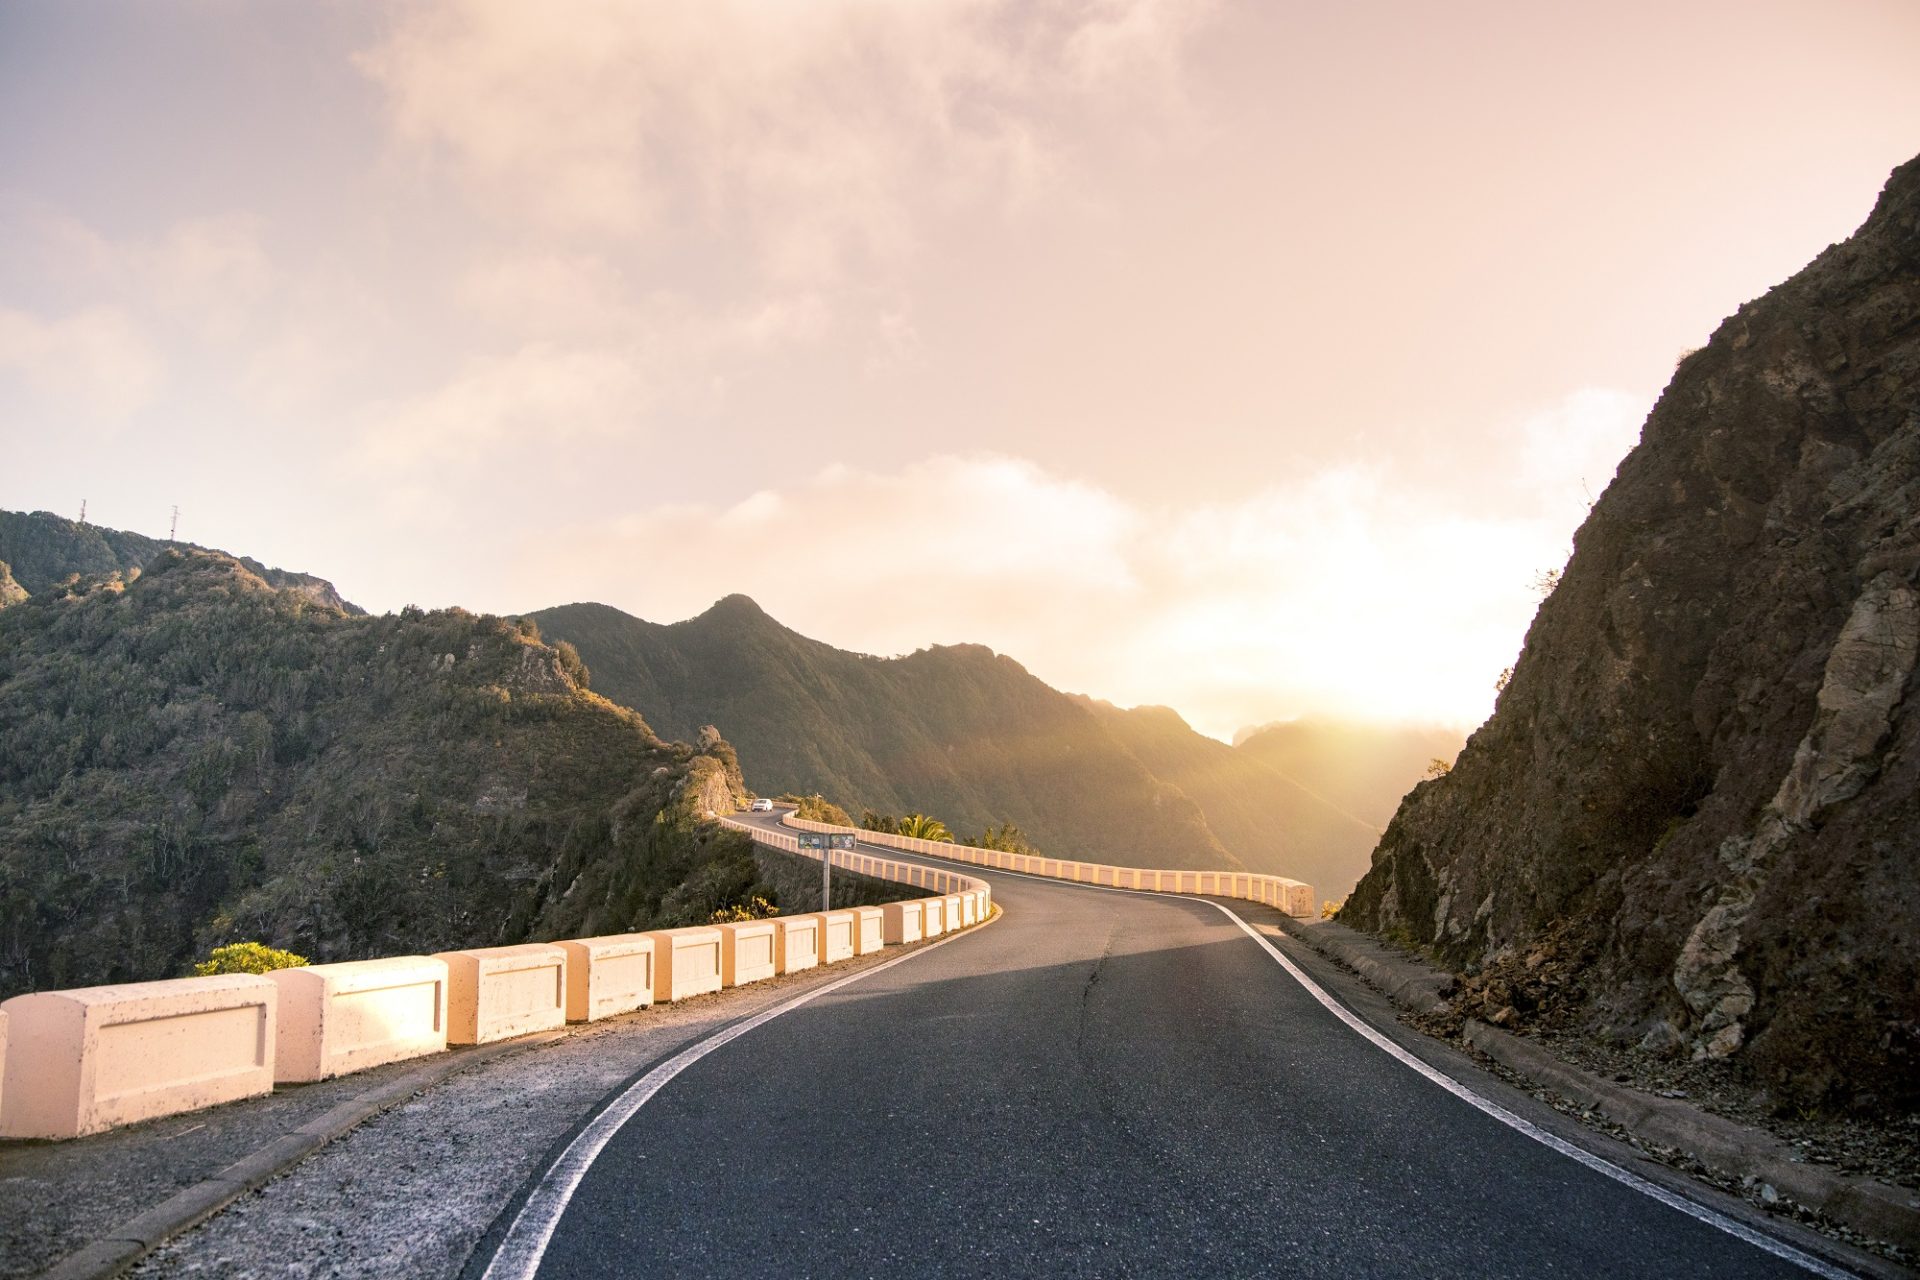 Travel background of highway in Anaga mountains with sunset rays. Canary Islands, Spain - March 15 2020